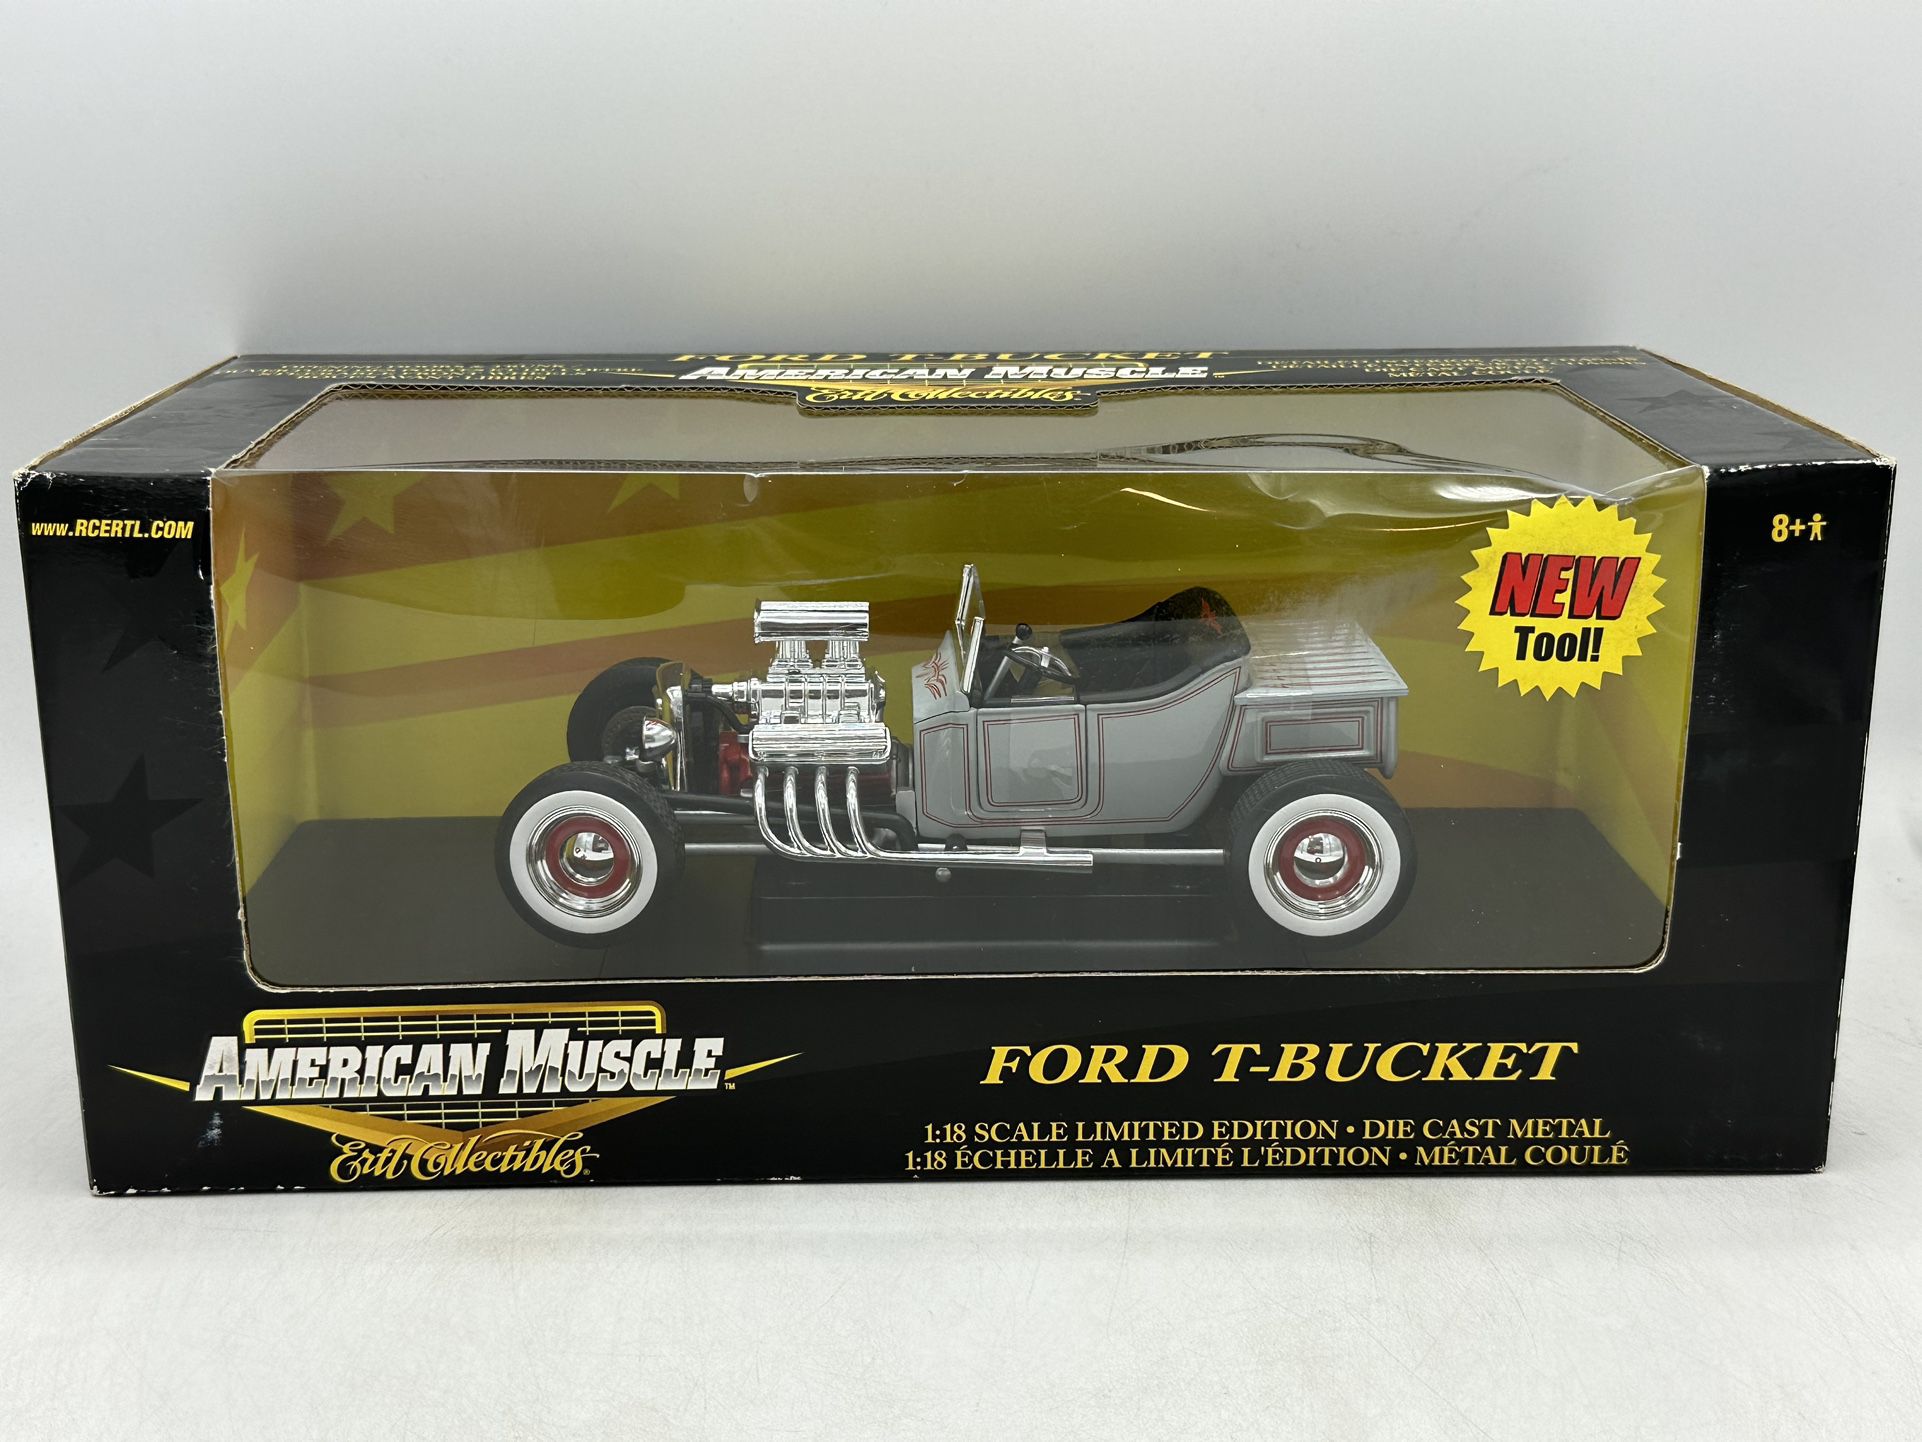 Ertl Collectibles 1:18 Scale Diecast Model Car - Ford T-Bucket for